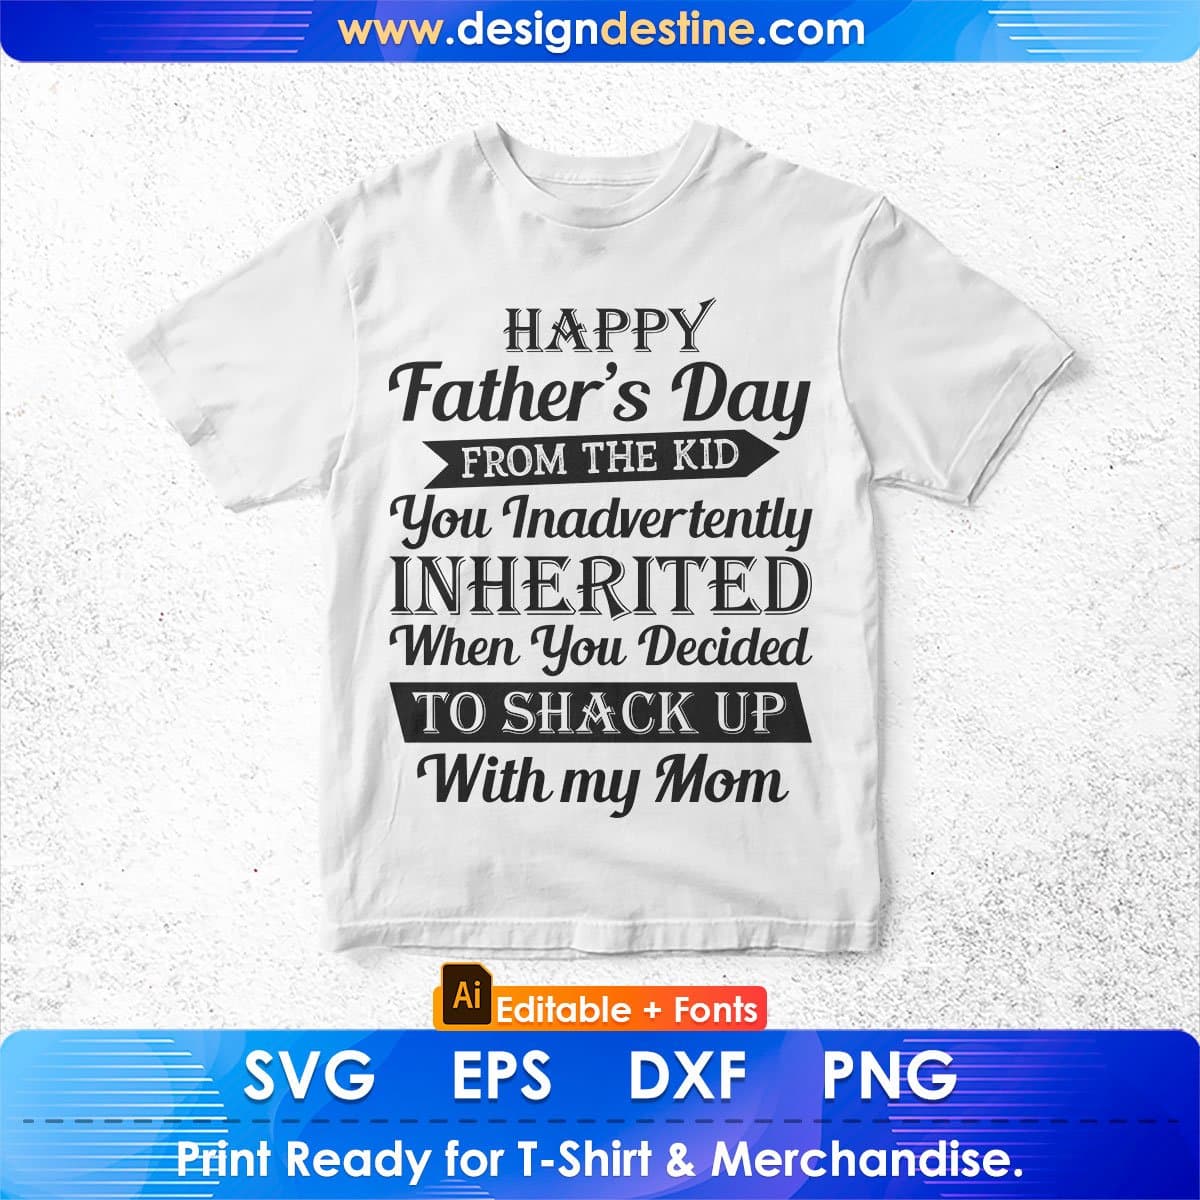 Happy Father's Day from The Kid Inherited Inadvertently Shack up Mom Editable T-shirt Design Svg Files